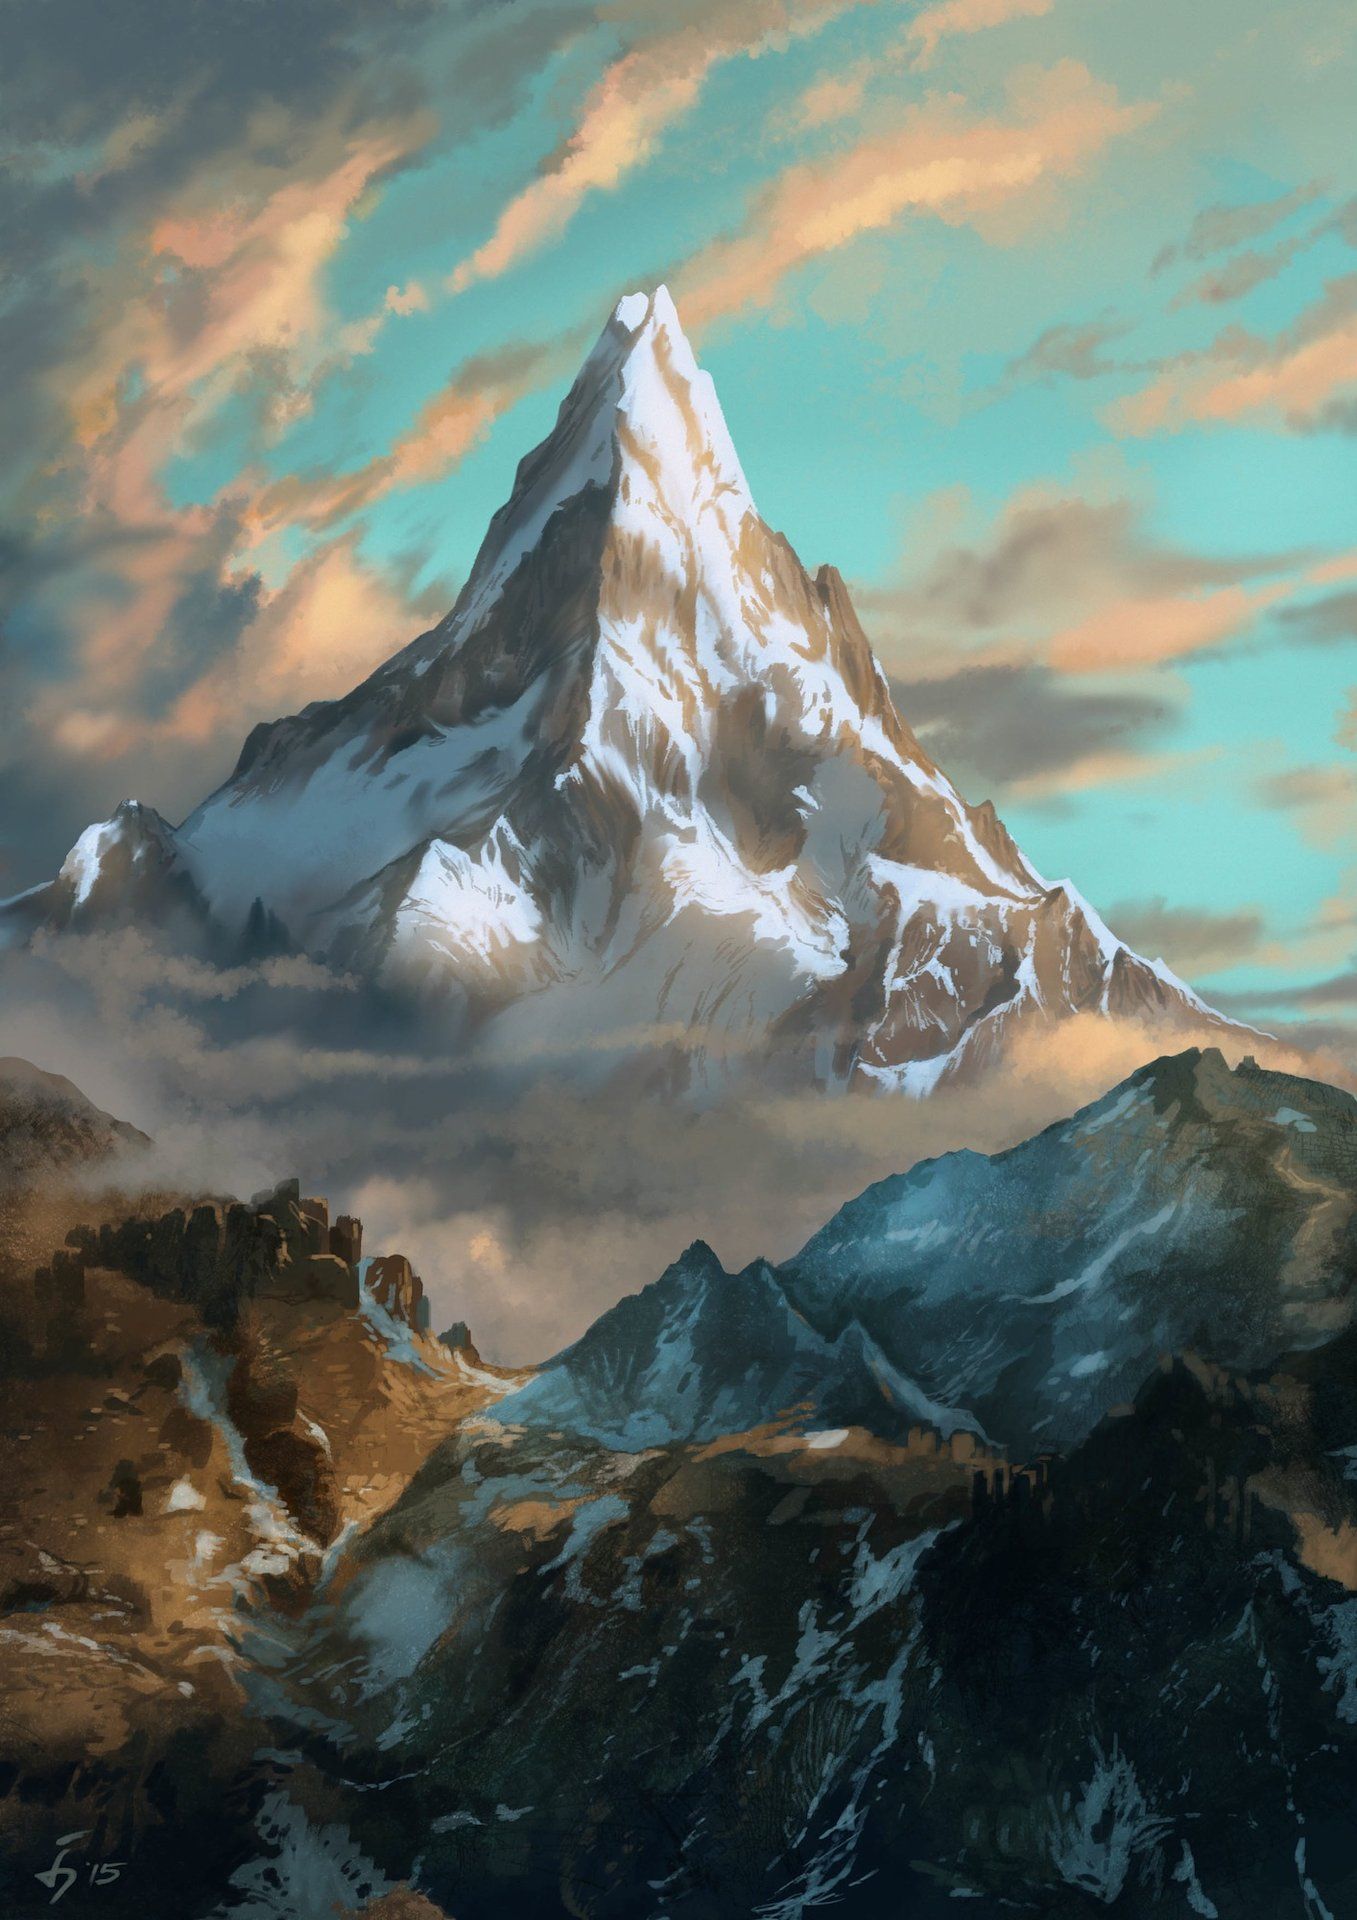 Erebor The Lonely Mountain, Denny Ibnu. Mountain paintings, Mountain art, Fantasy landscape